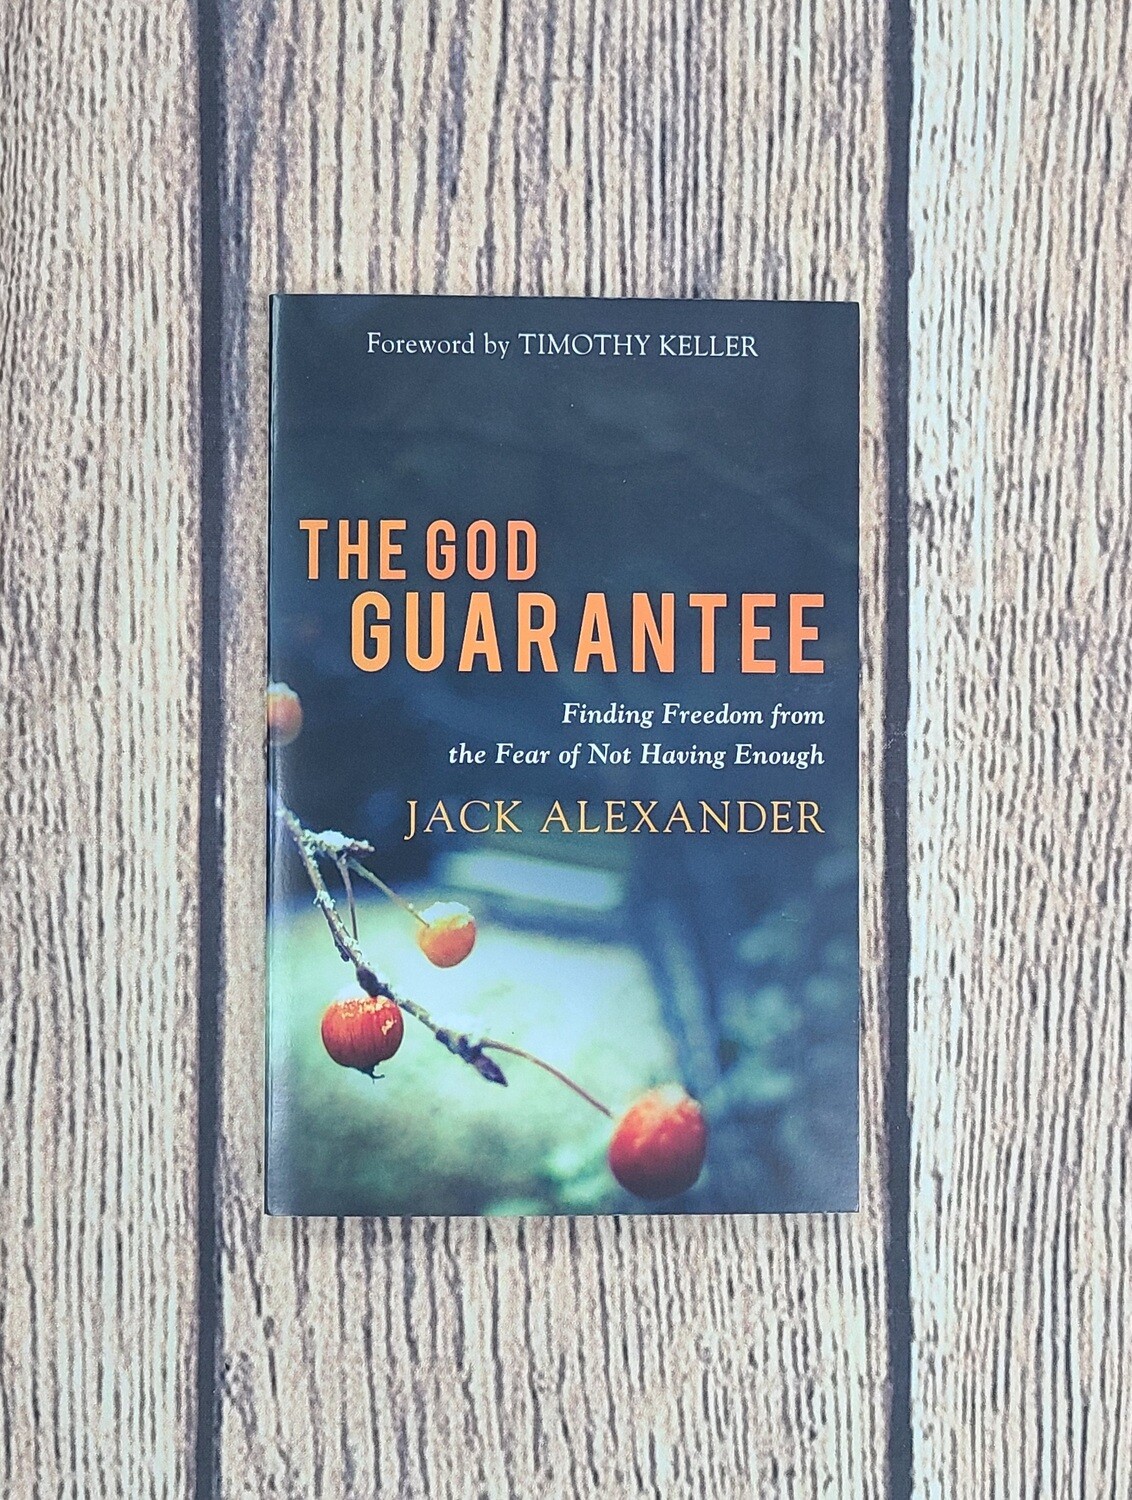 The God Guarantee by Jack Alexander